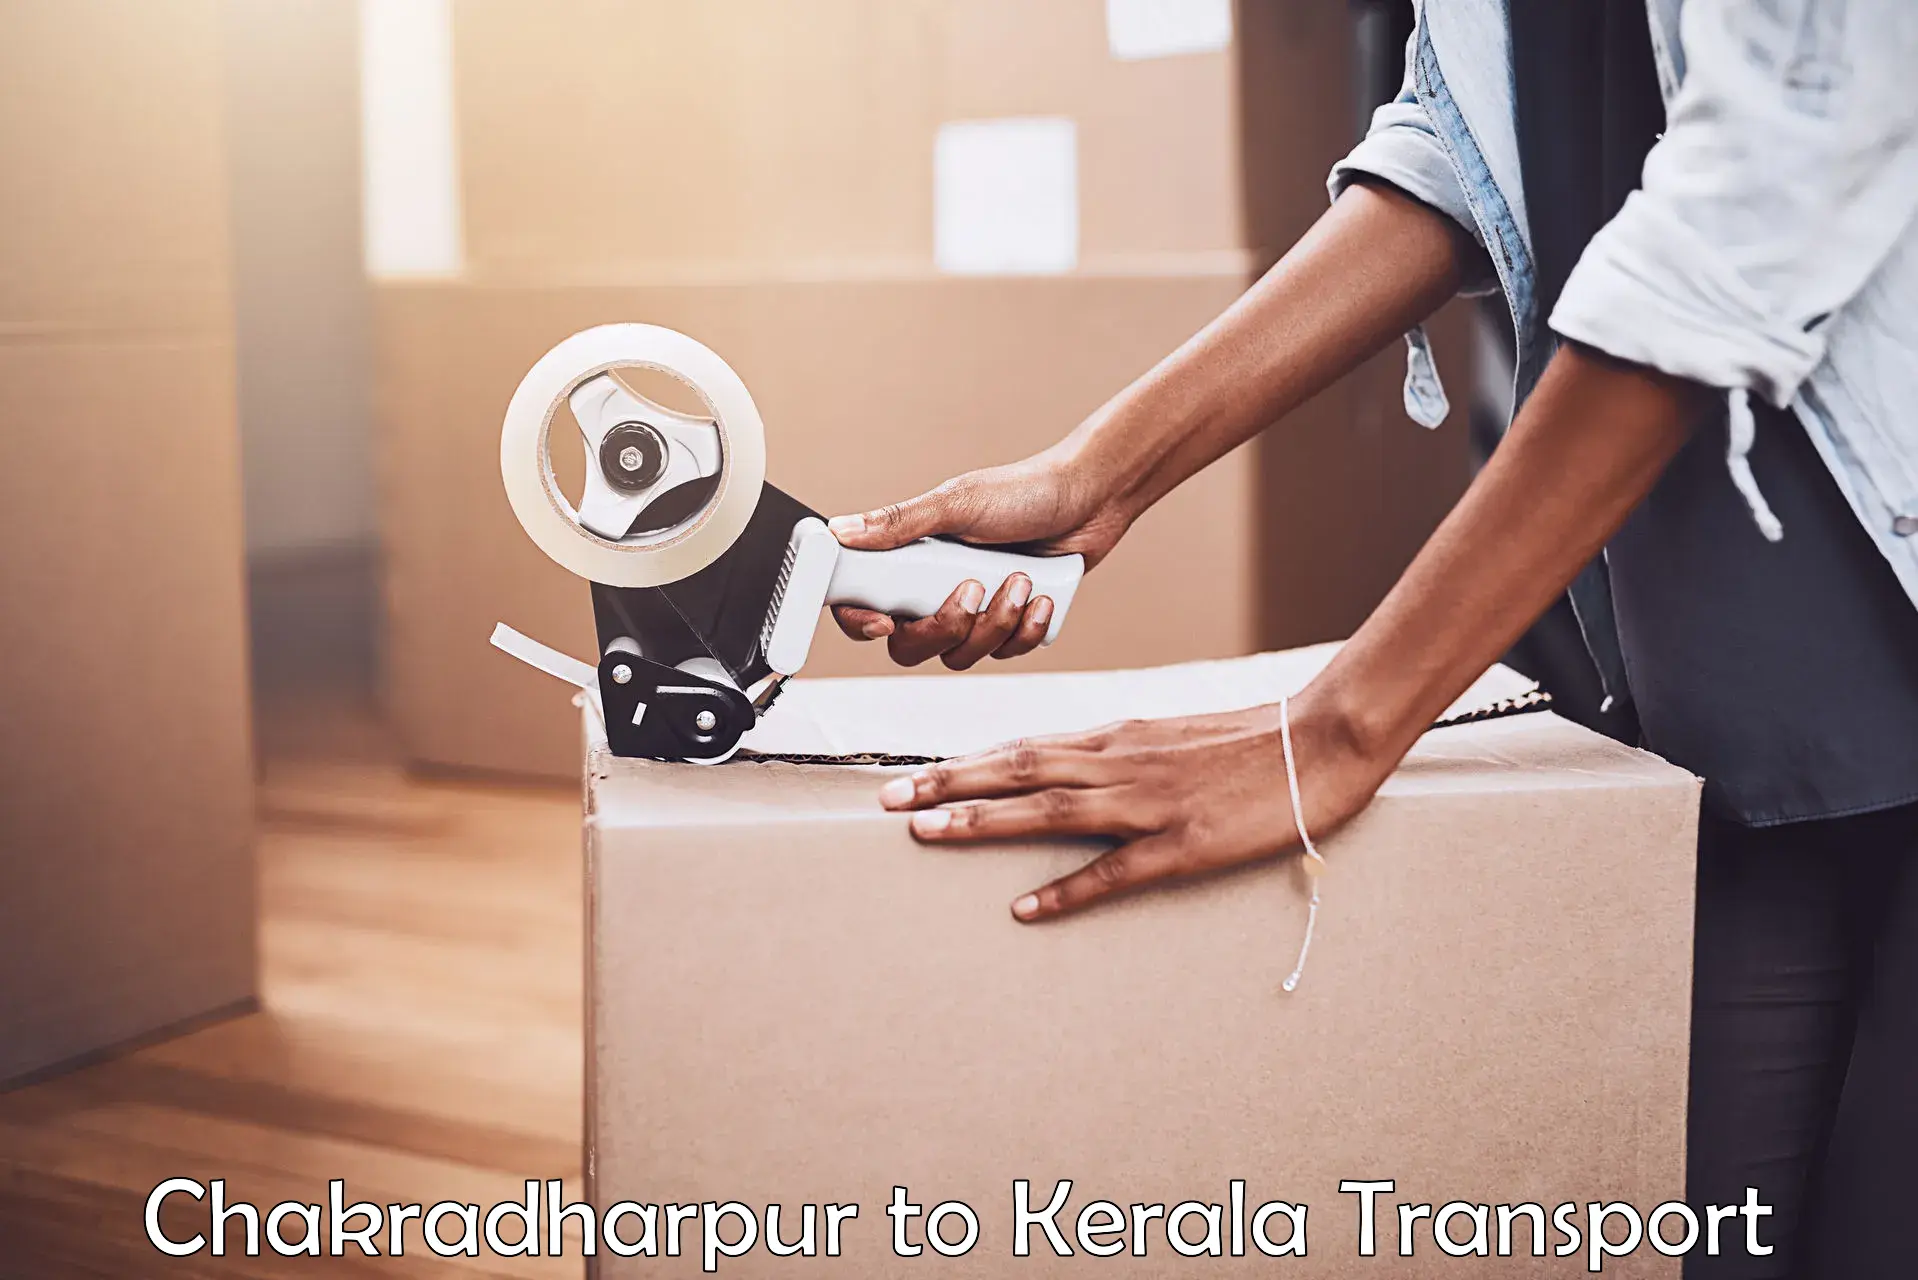 Commercial transport service Chakradharpur to Wayanad